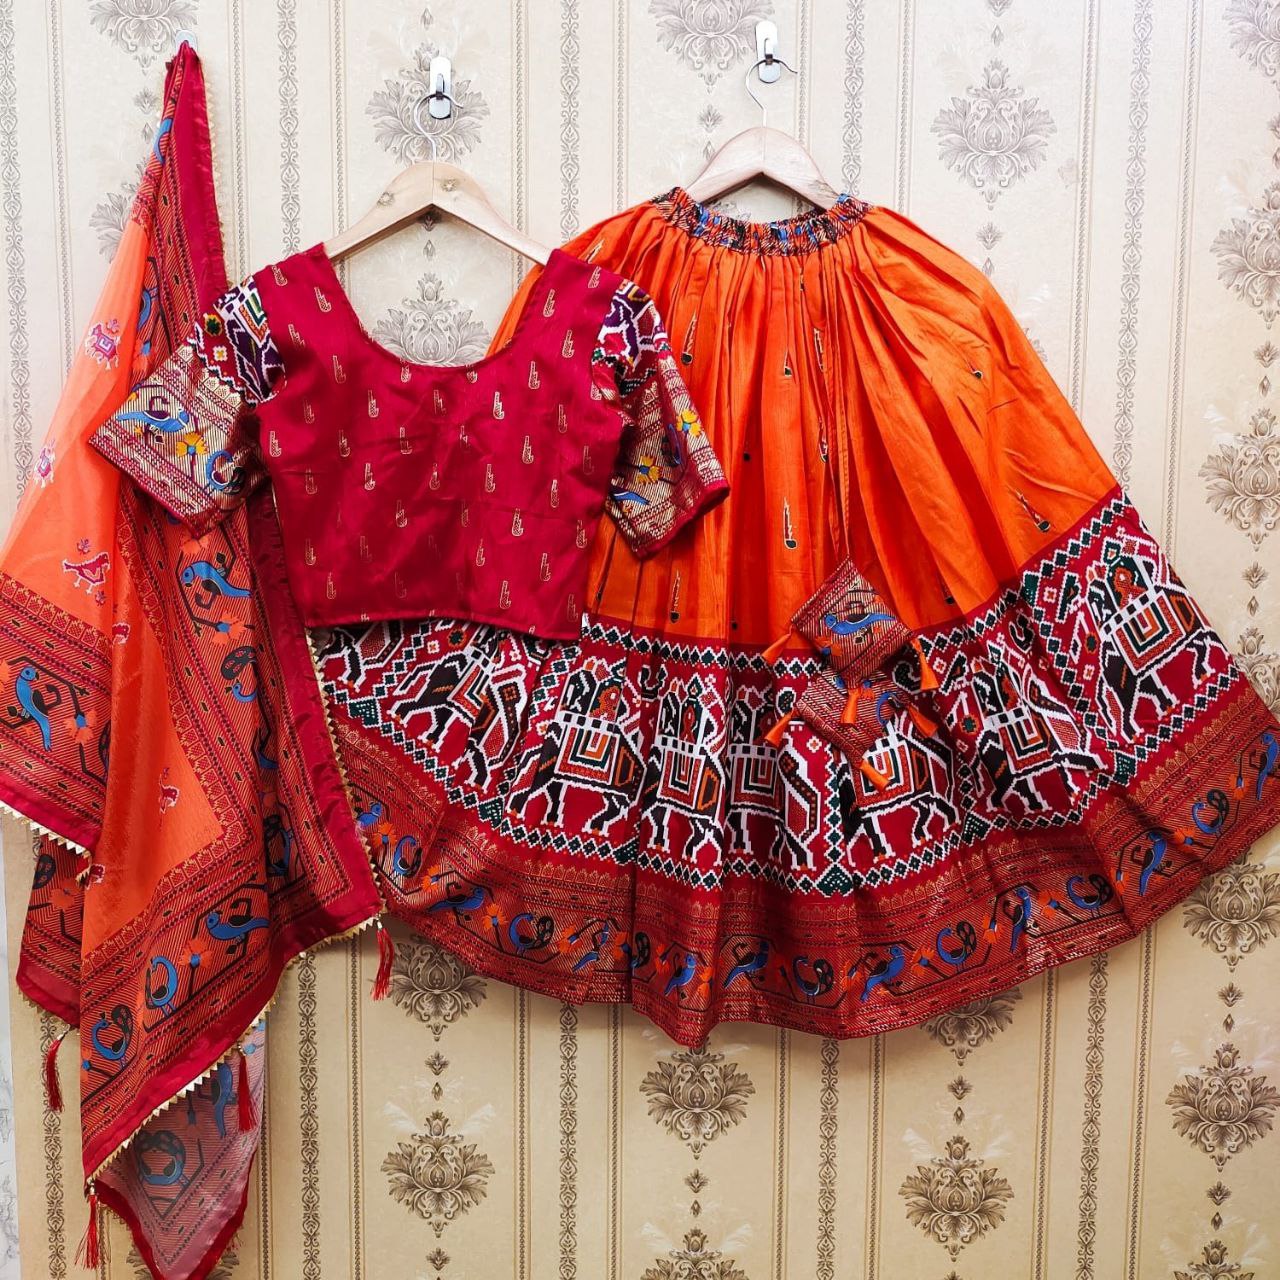 Bandhani Lehenga Choli from Jaipur with Thread Embroidered Flowers and  Mirrors | Exotic India Art